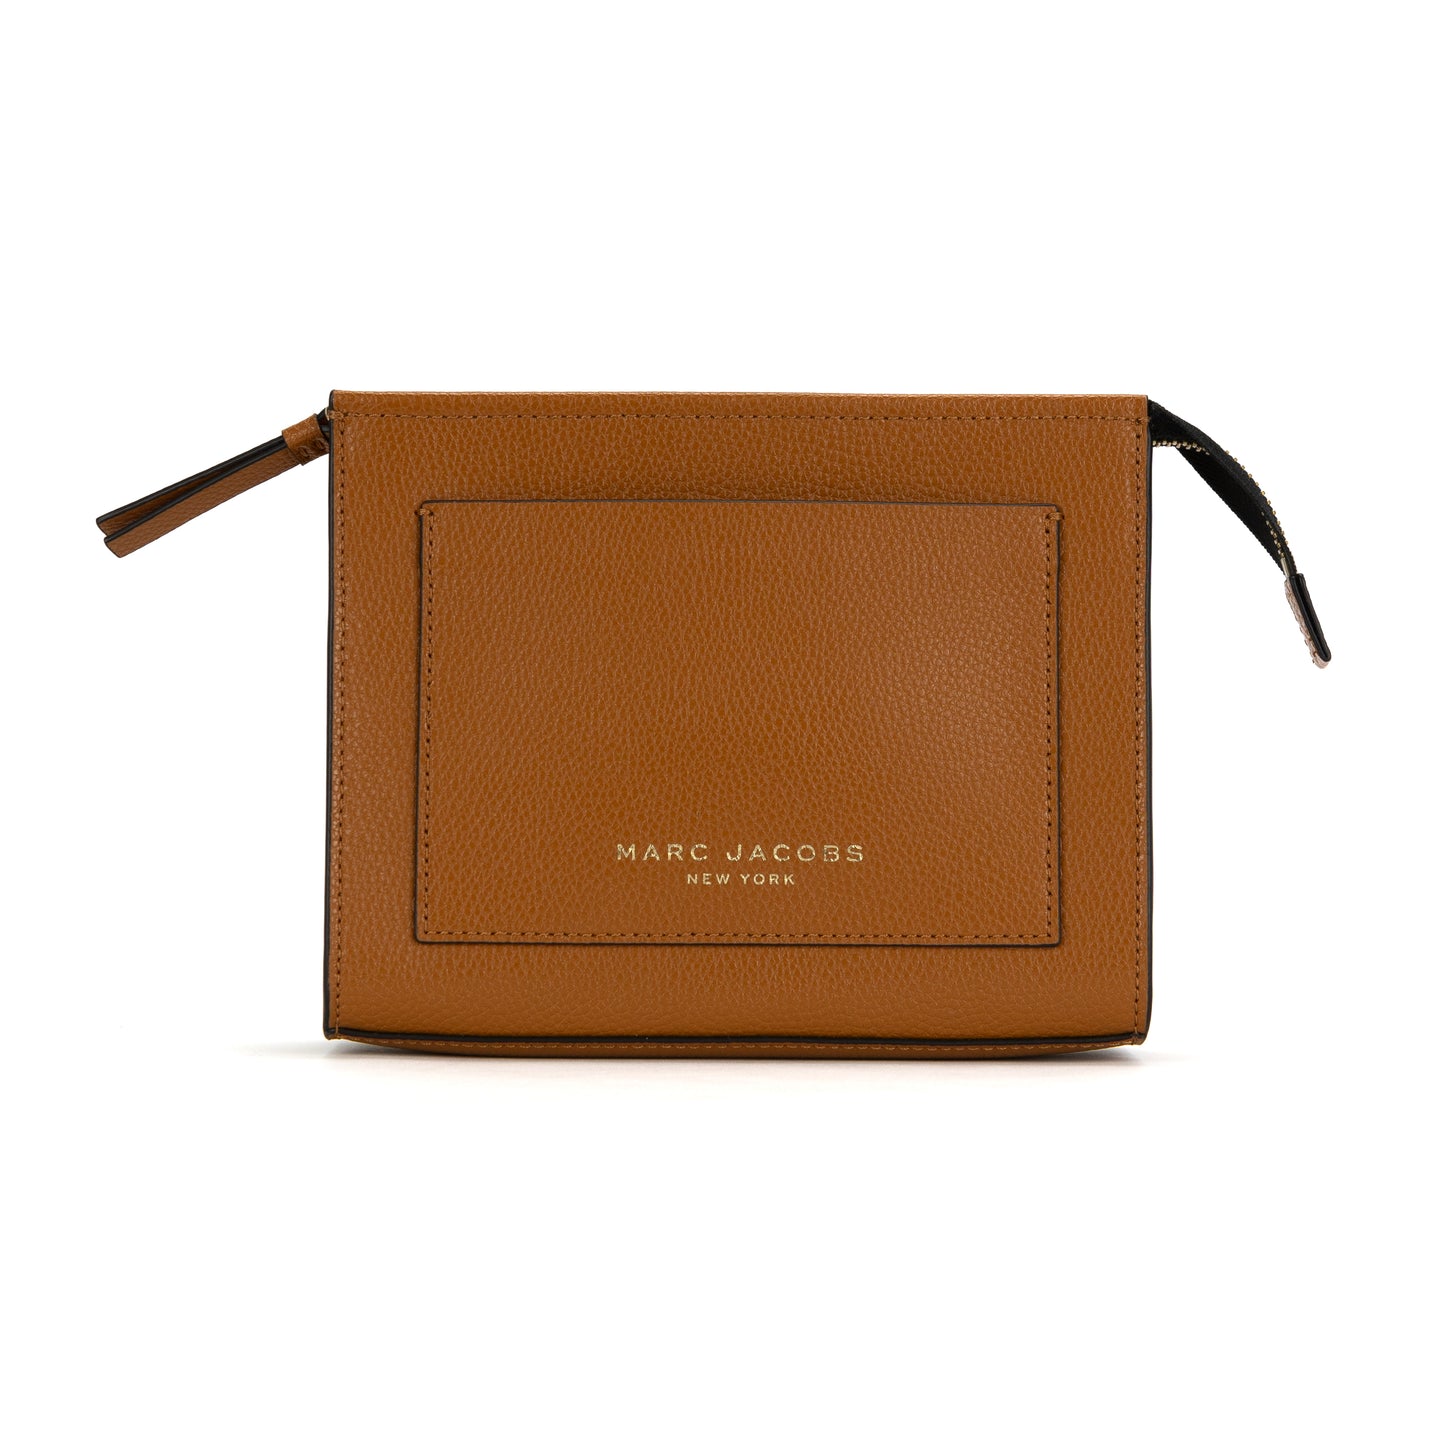 Marc Jacobs The Grind Leather Cosmetic Bag - Smoked Almond